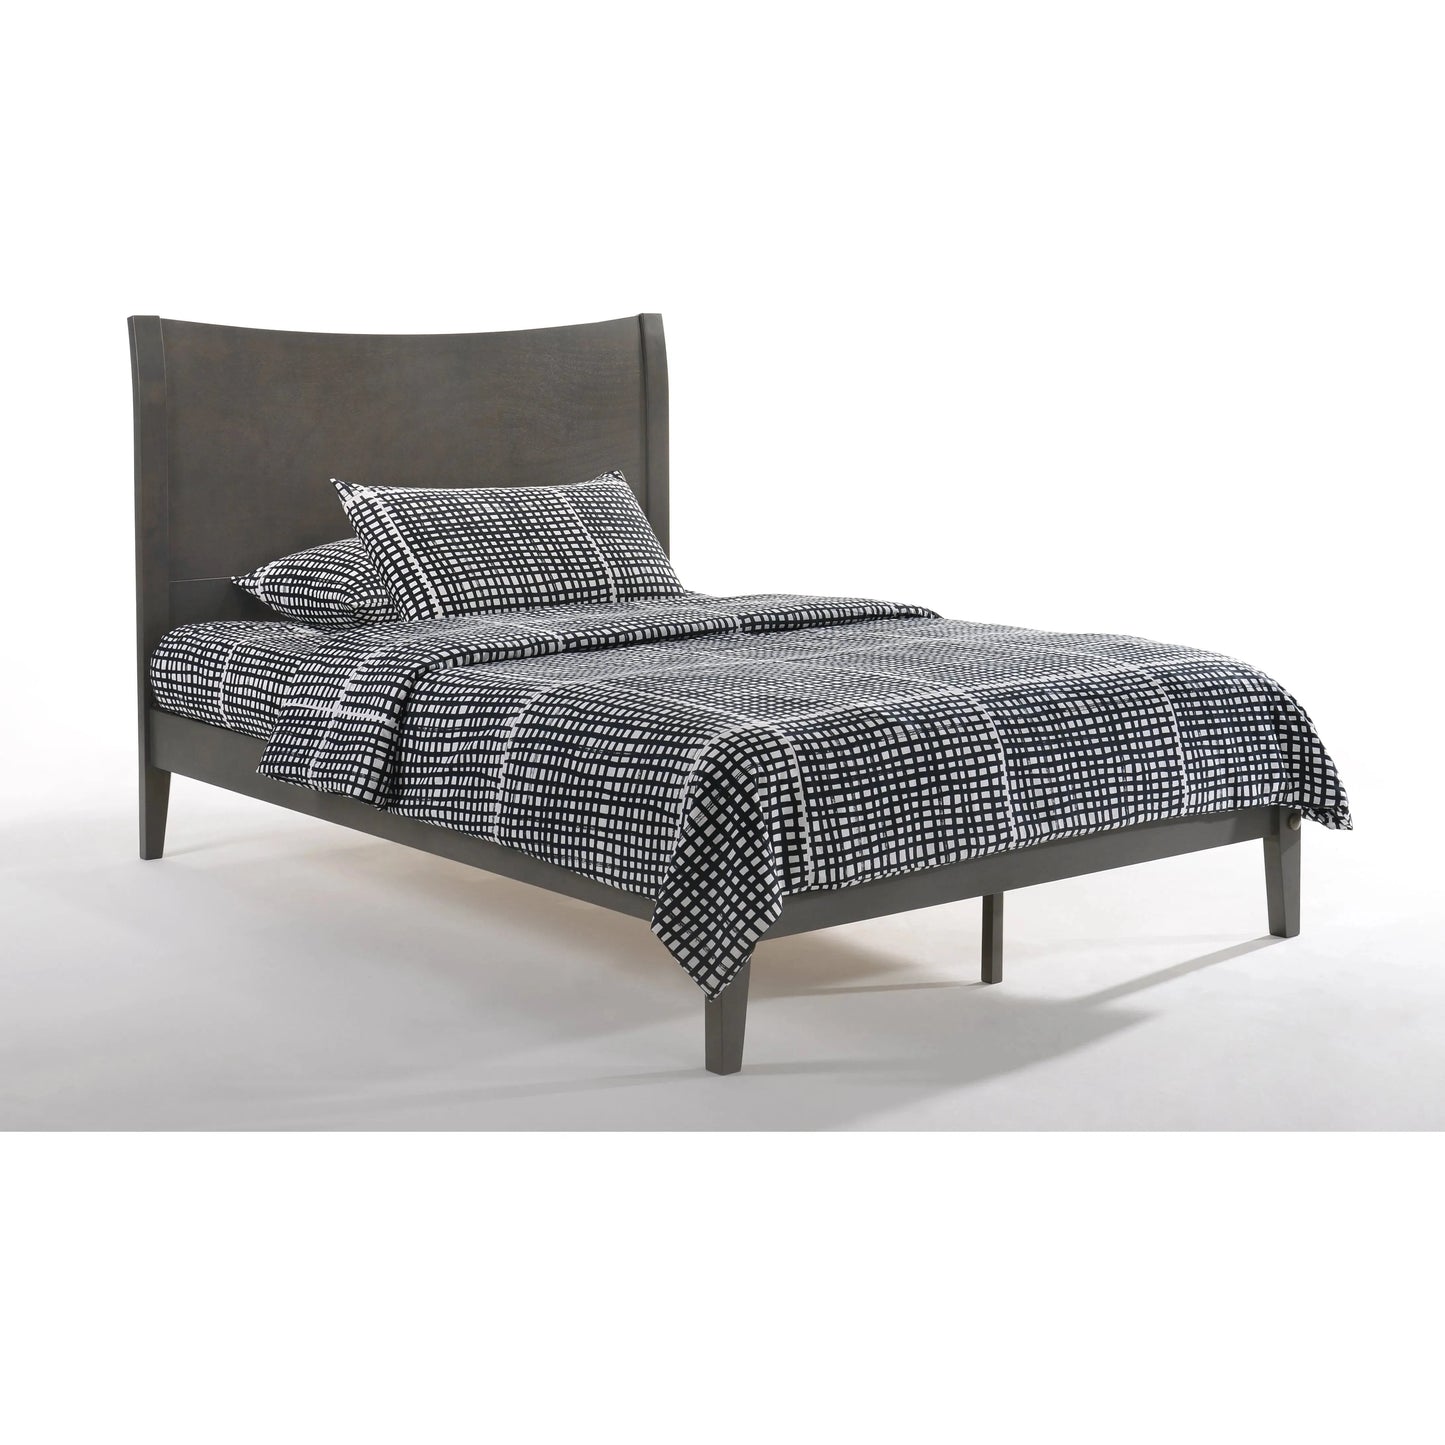 Night And Day Blackpepper King Bed in cherry finish (P Series) BPE-PH-EKG-COM-P-CH